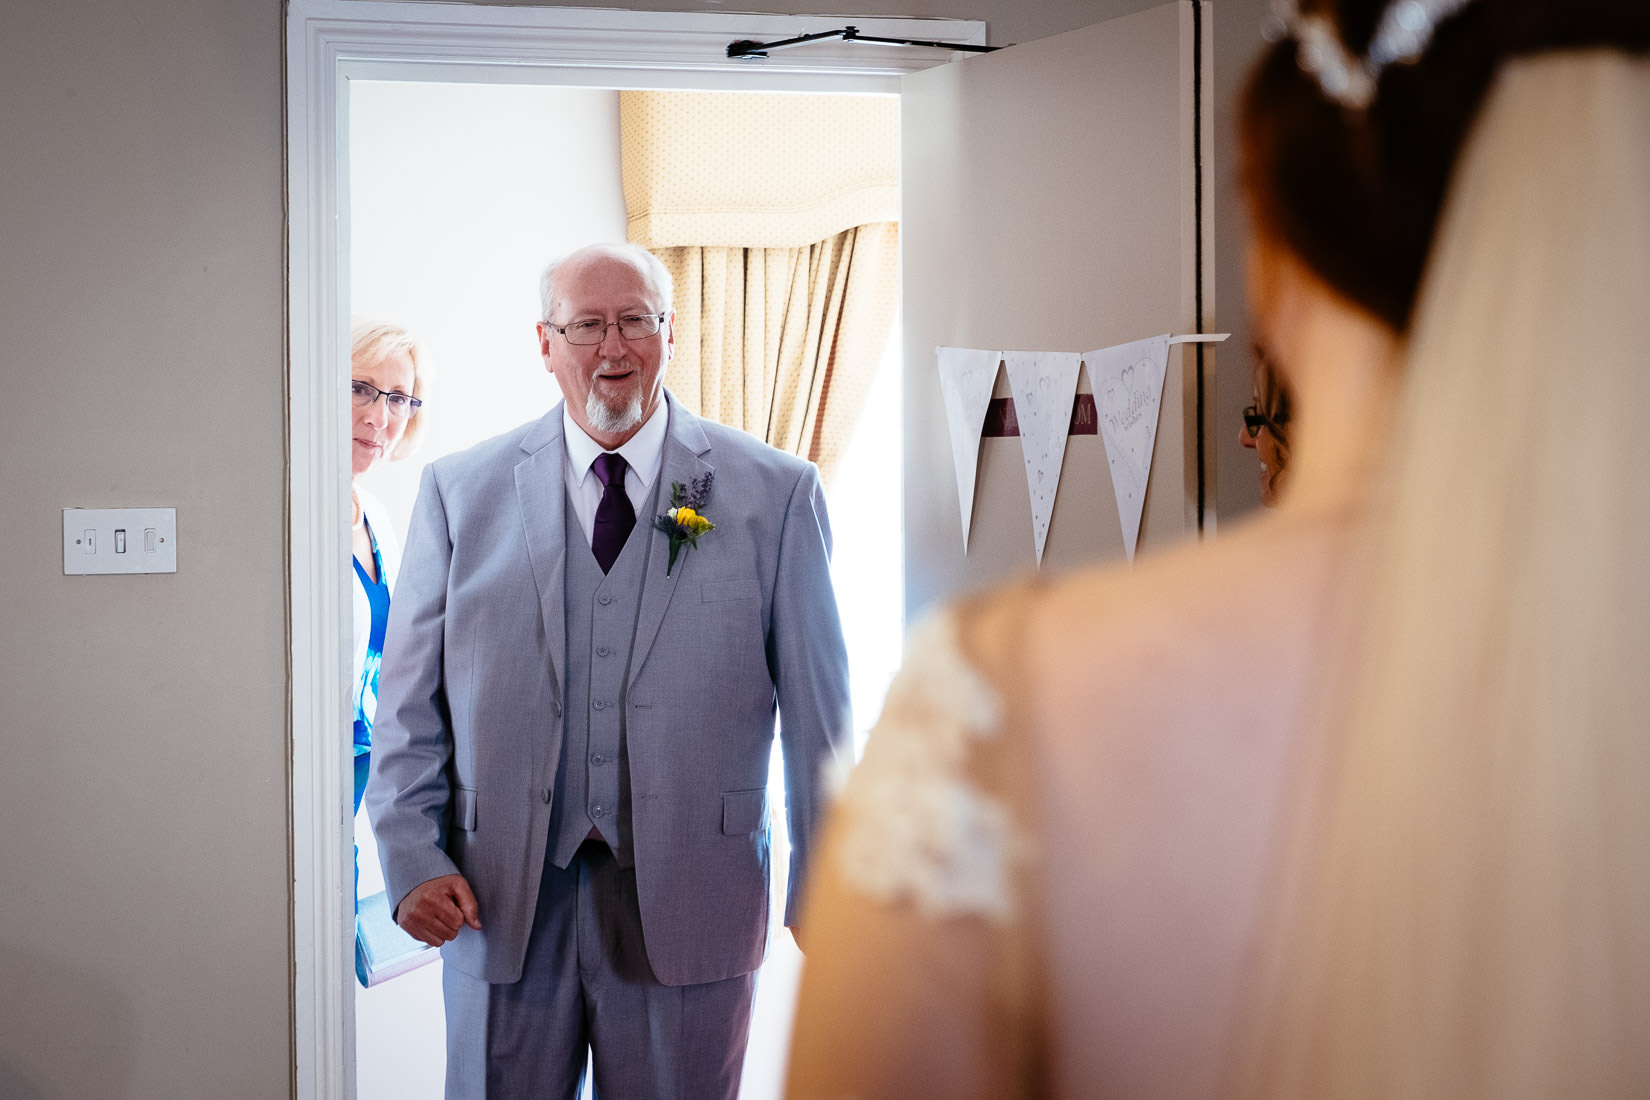 father seeing his daughter in a wedding dress for the first time